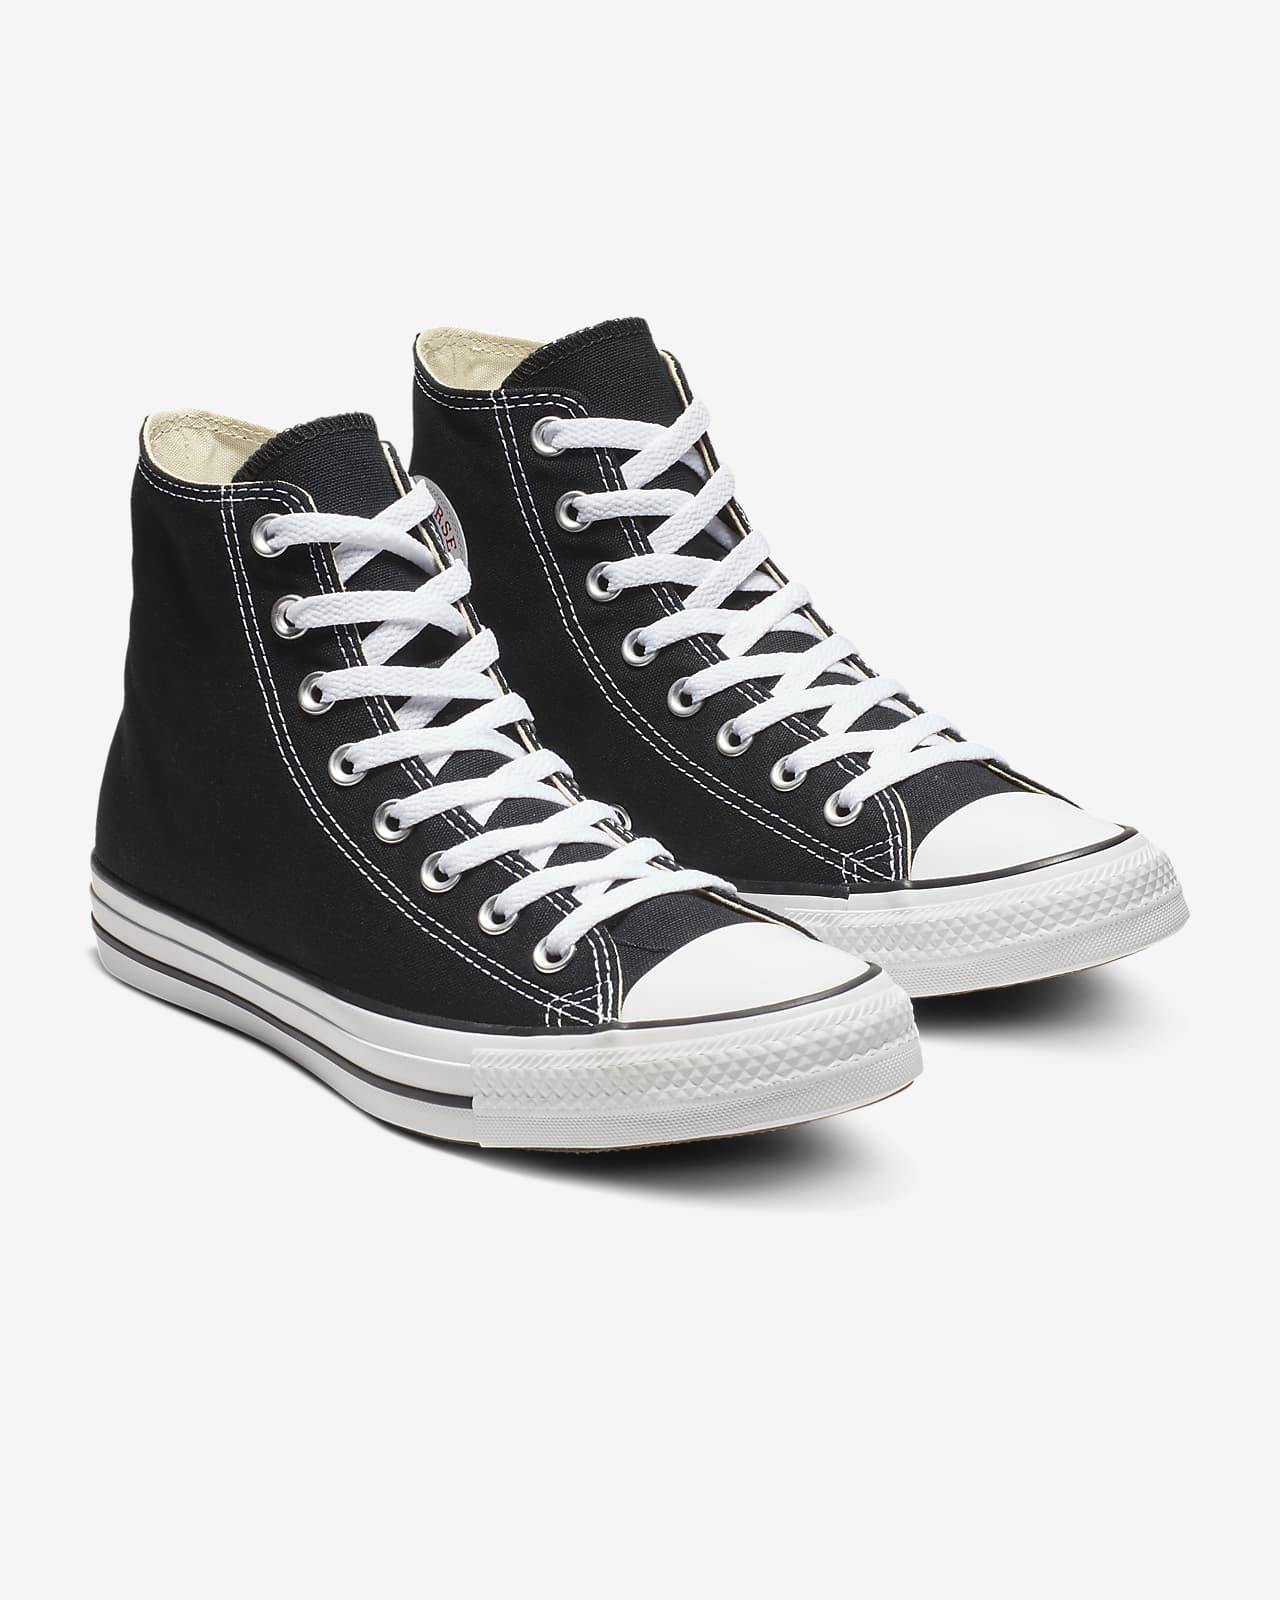 converse all star high tops boots